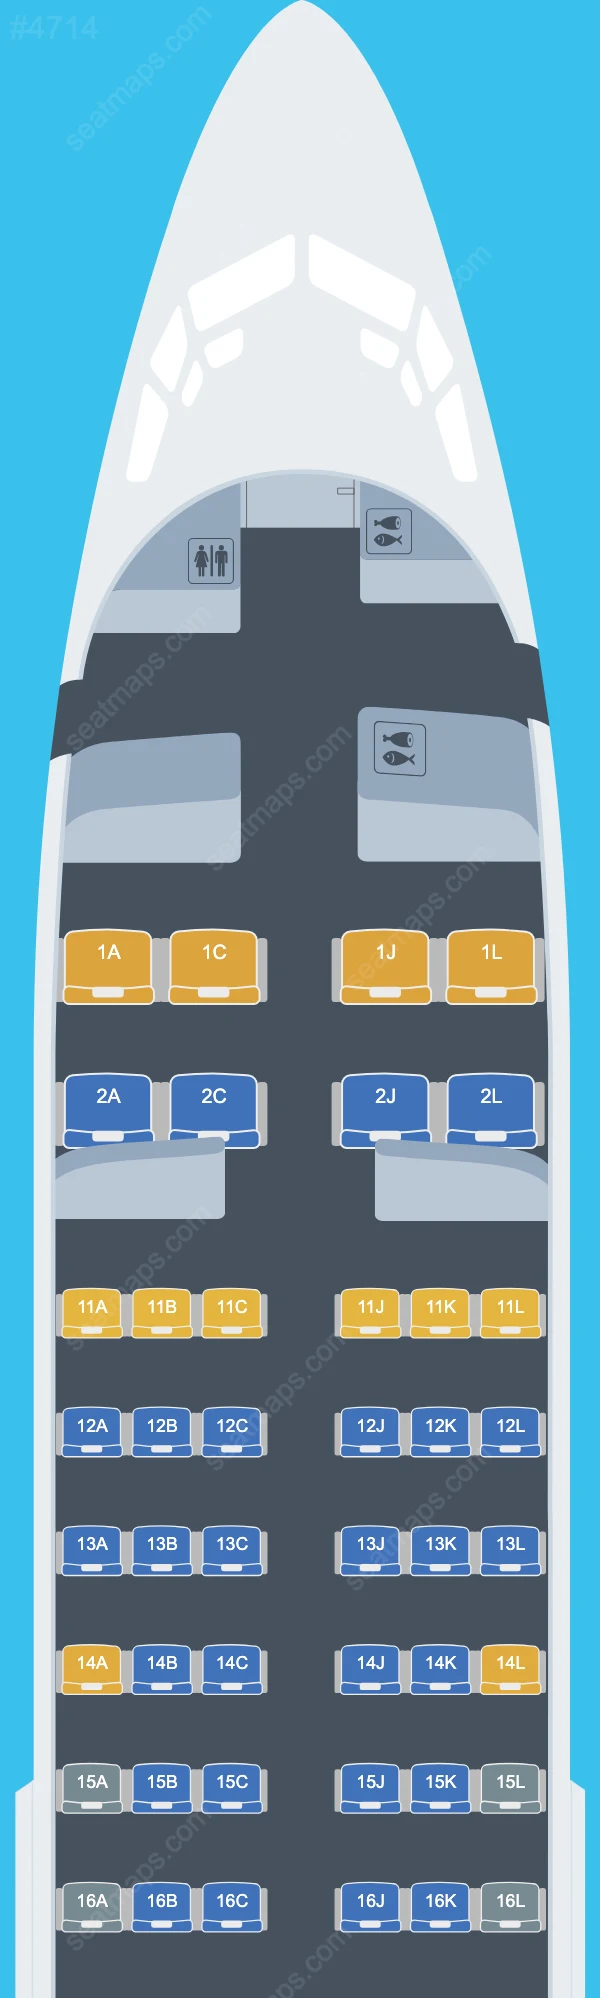 Alexandria Airlines Boeing 737 Seat Maps 737-300 V.1